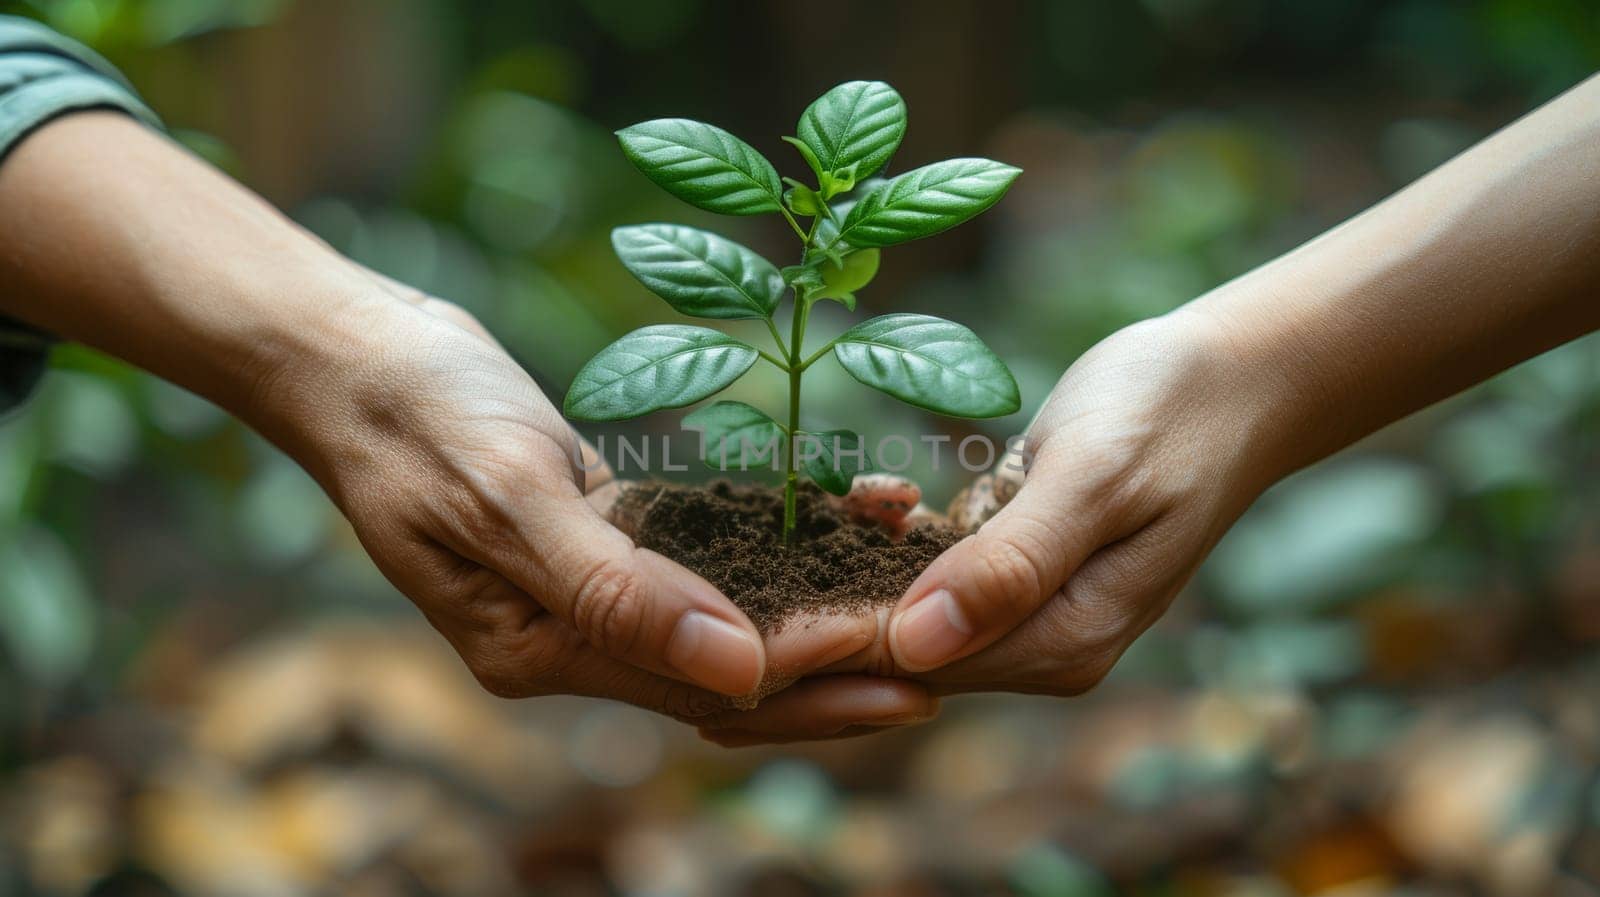 Assuring Sustainable partner trust is the mission of ecosystem plant business holding green plants together. The concept of sustainable partner trust which incorporates the development ecology concept